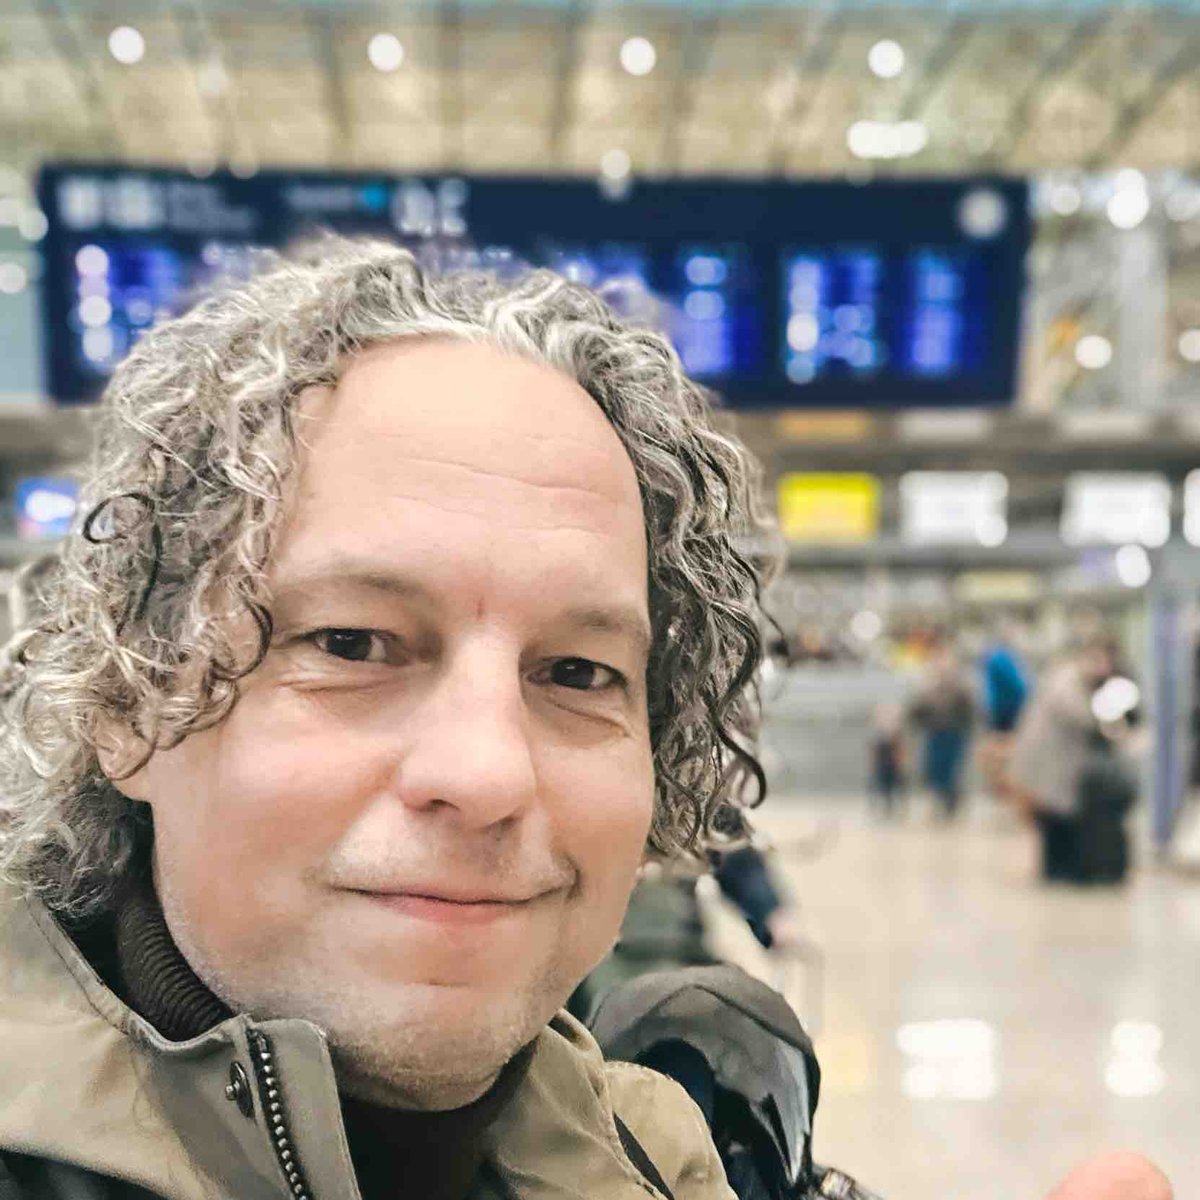 Adventure awaits! Michael Gairing at the airport, backpack ready, eyes sparkling with excitement.
Can our VR community guess where he’s jetting off to?
The world is full of mysteries, and Michael’s about to unravel one.
Stay tuned!  #MysteryDestination #VRAdventures”